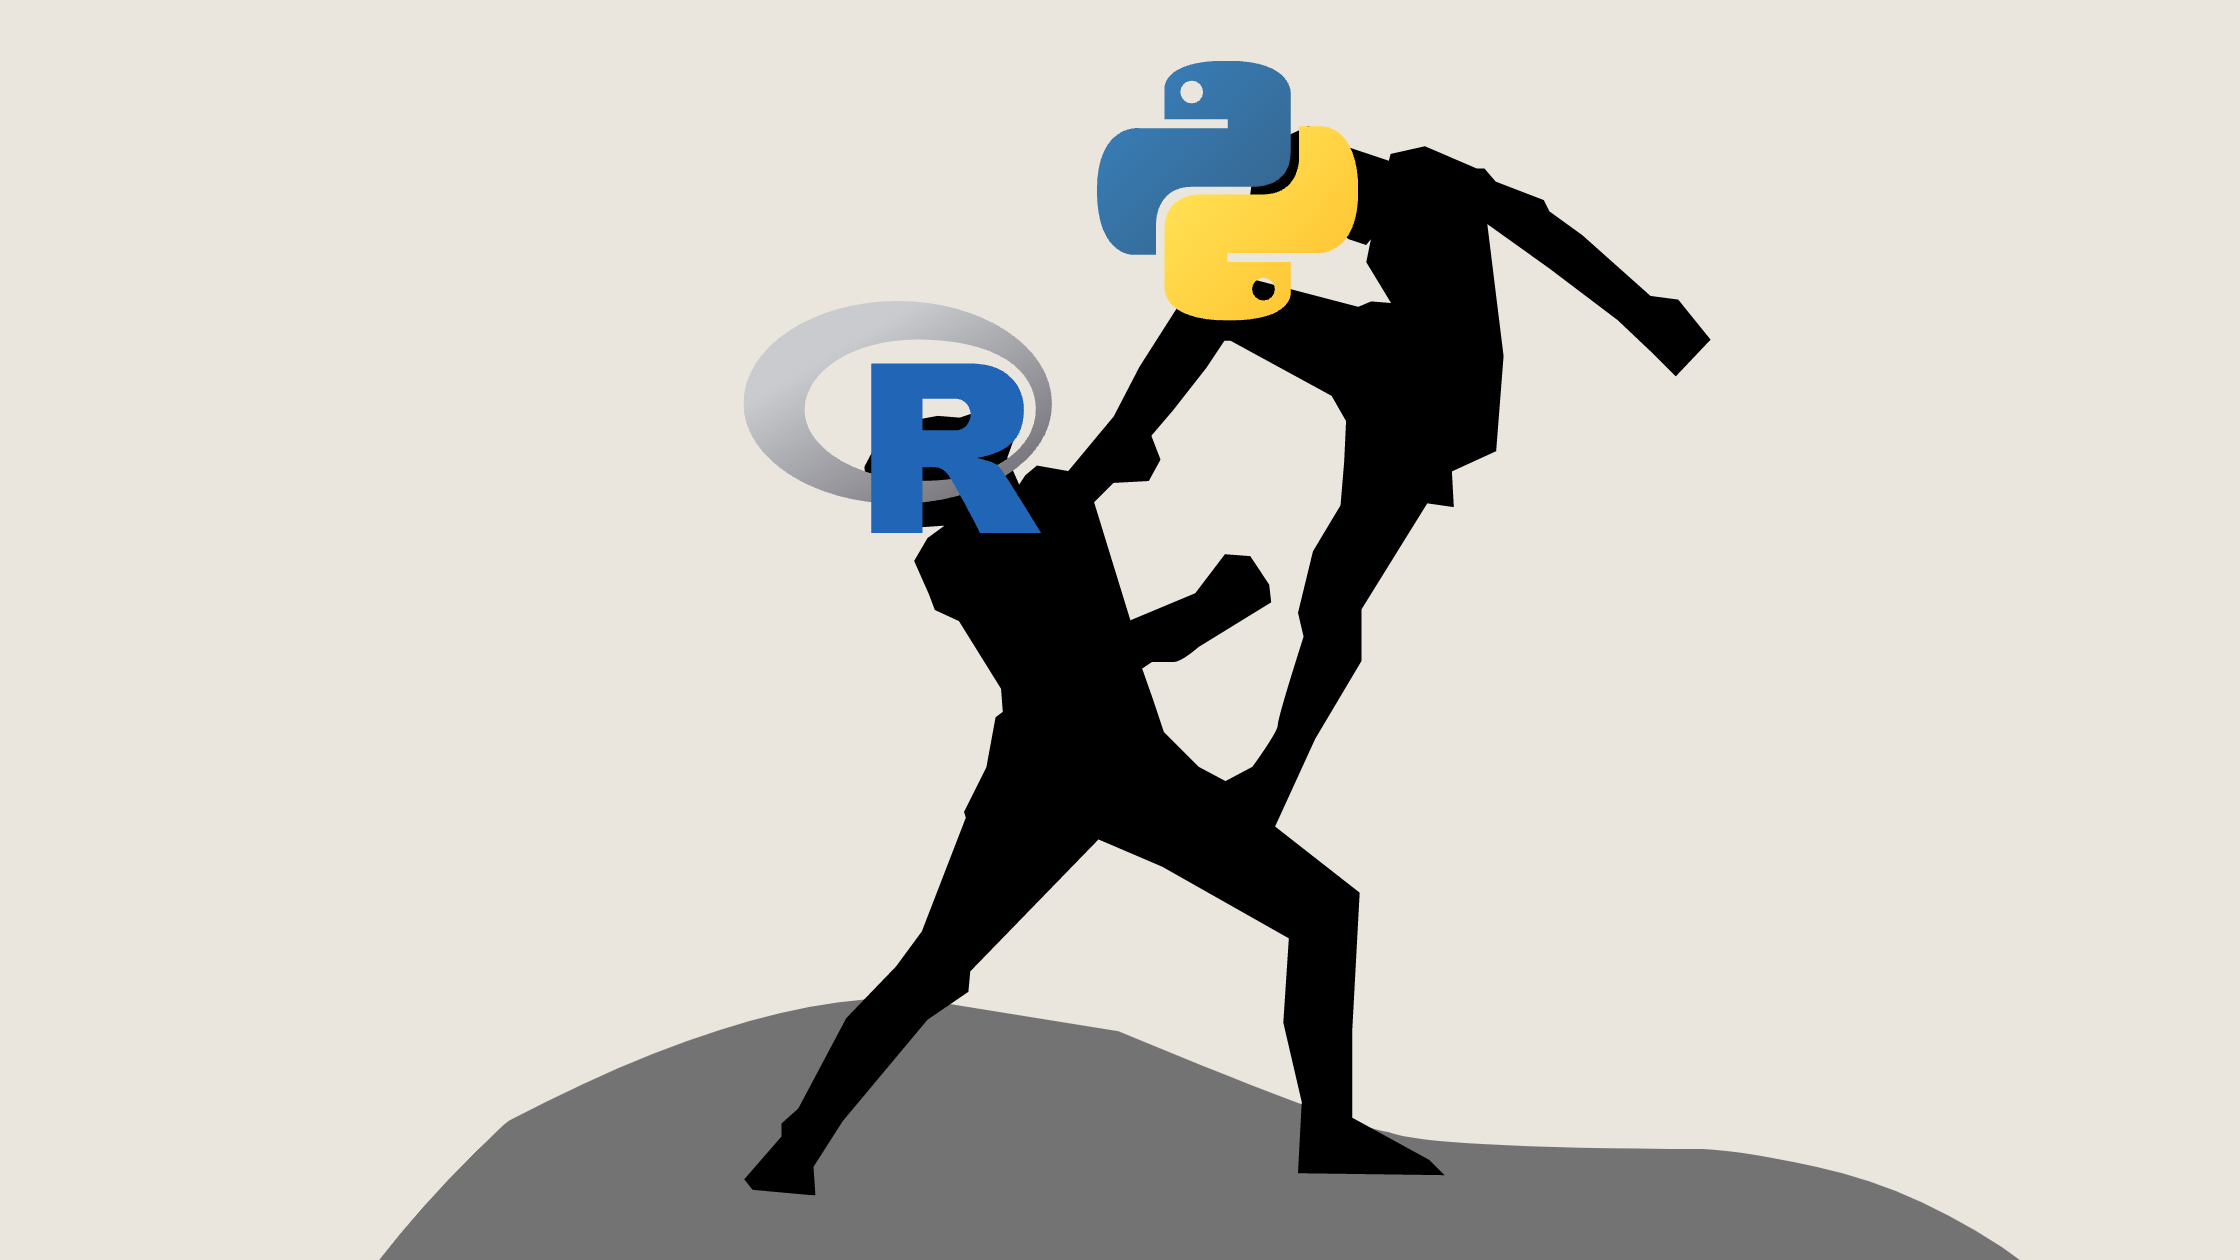 An image of python and R fighting.